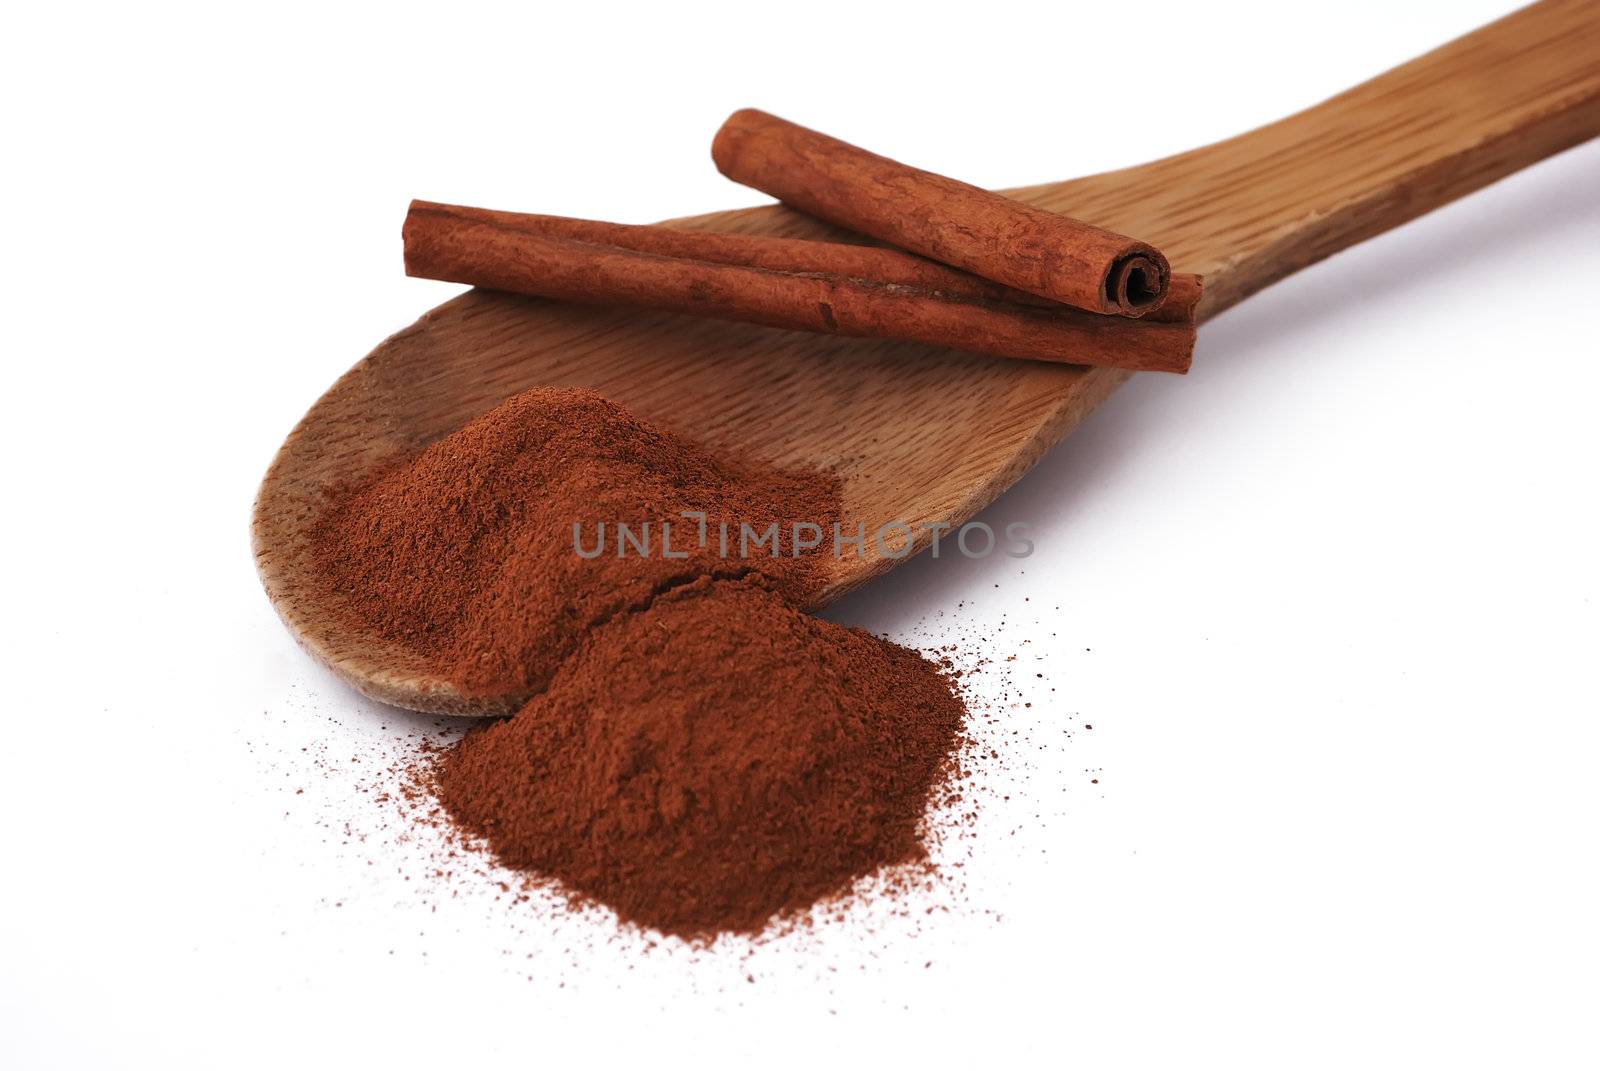 wooden spoon with cinnamon and a few tubes of cinnamon